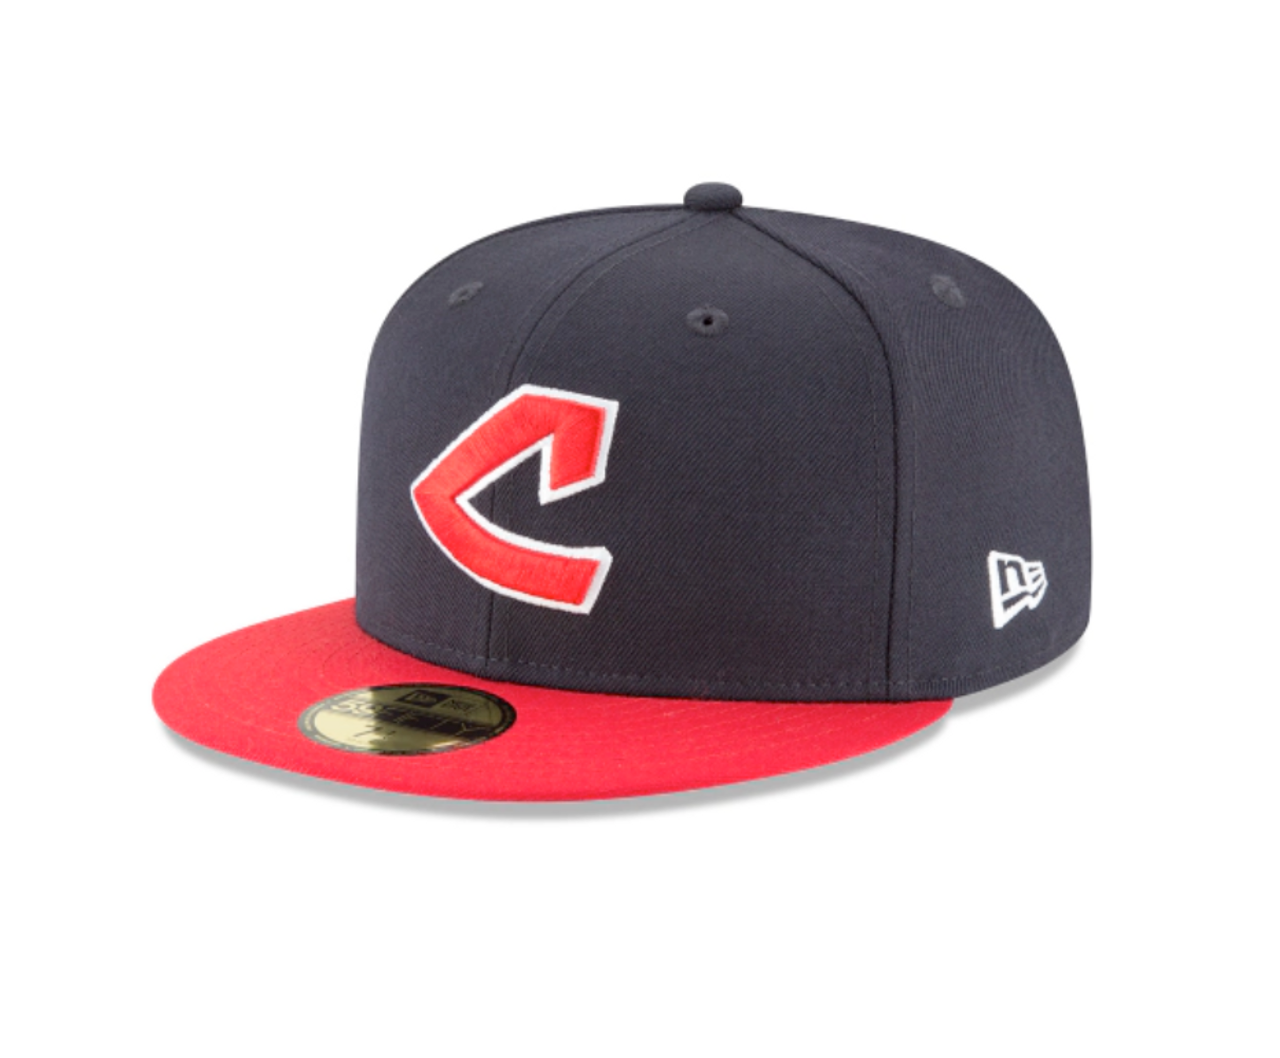 Atlanta Braves New Era Cooperstown Collection Turn Back the Clock Throwback  59FIFTY Fitted Hat - White/Royal